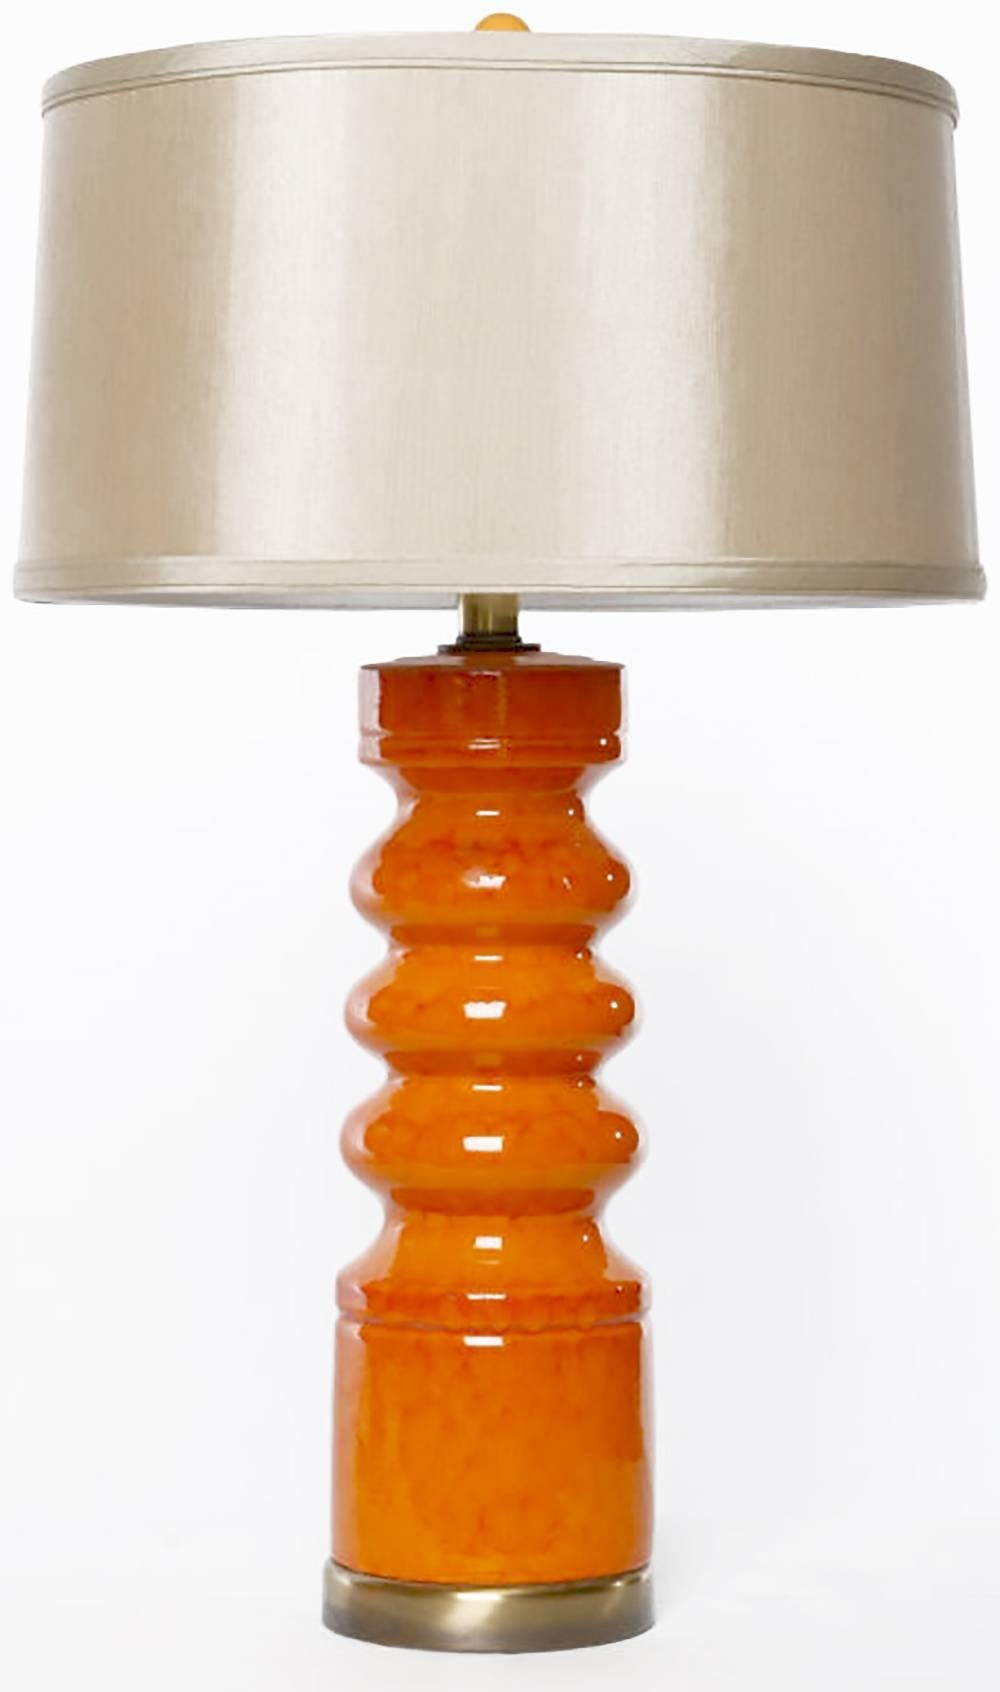 Pair of tangerine orange ceramic table lamps with a textured drip-glaze finish. Antiqued brass bases and stems. Brass harp and socket. Sold sans shades.